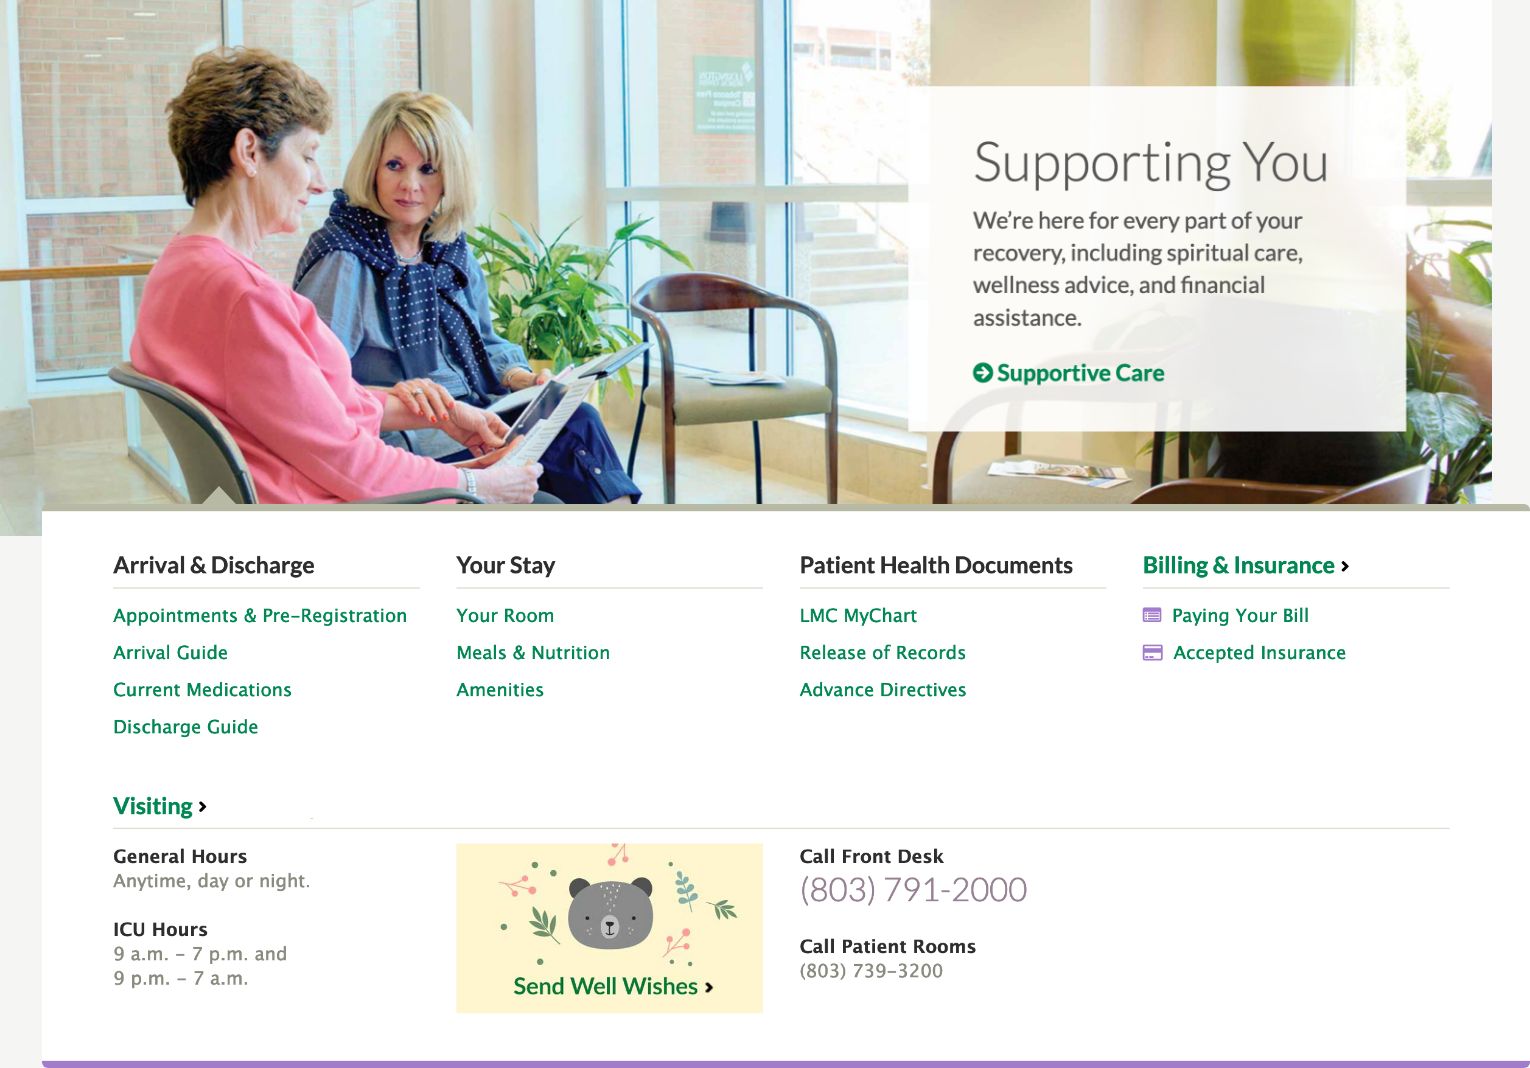 Two excerpts from lexmed.com. The first shows a full-width banner for Supportive Care, showing a patient getting help from a  nurse navigator. The second shows the Patients & Visitors section menu with a cute illustrated bear for sending well wishes.